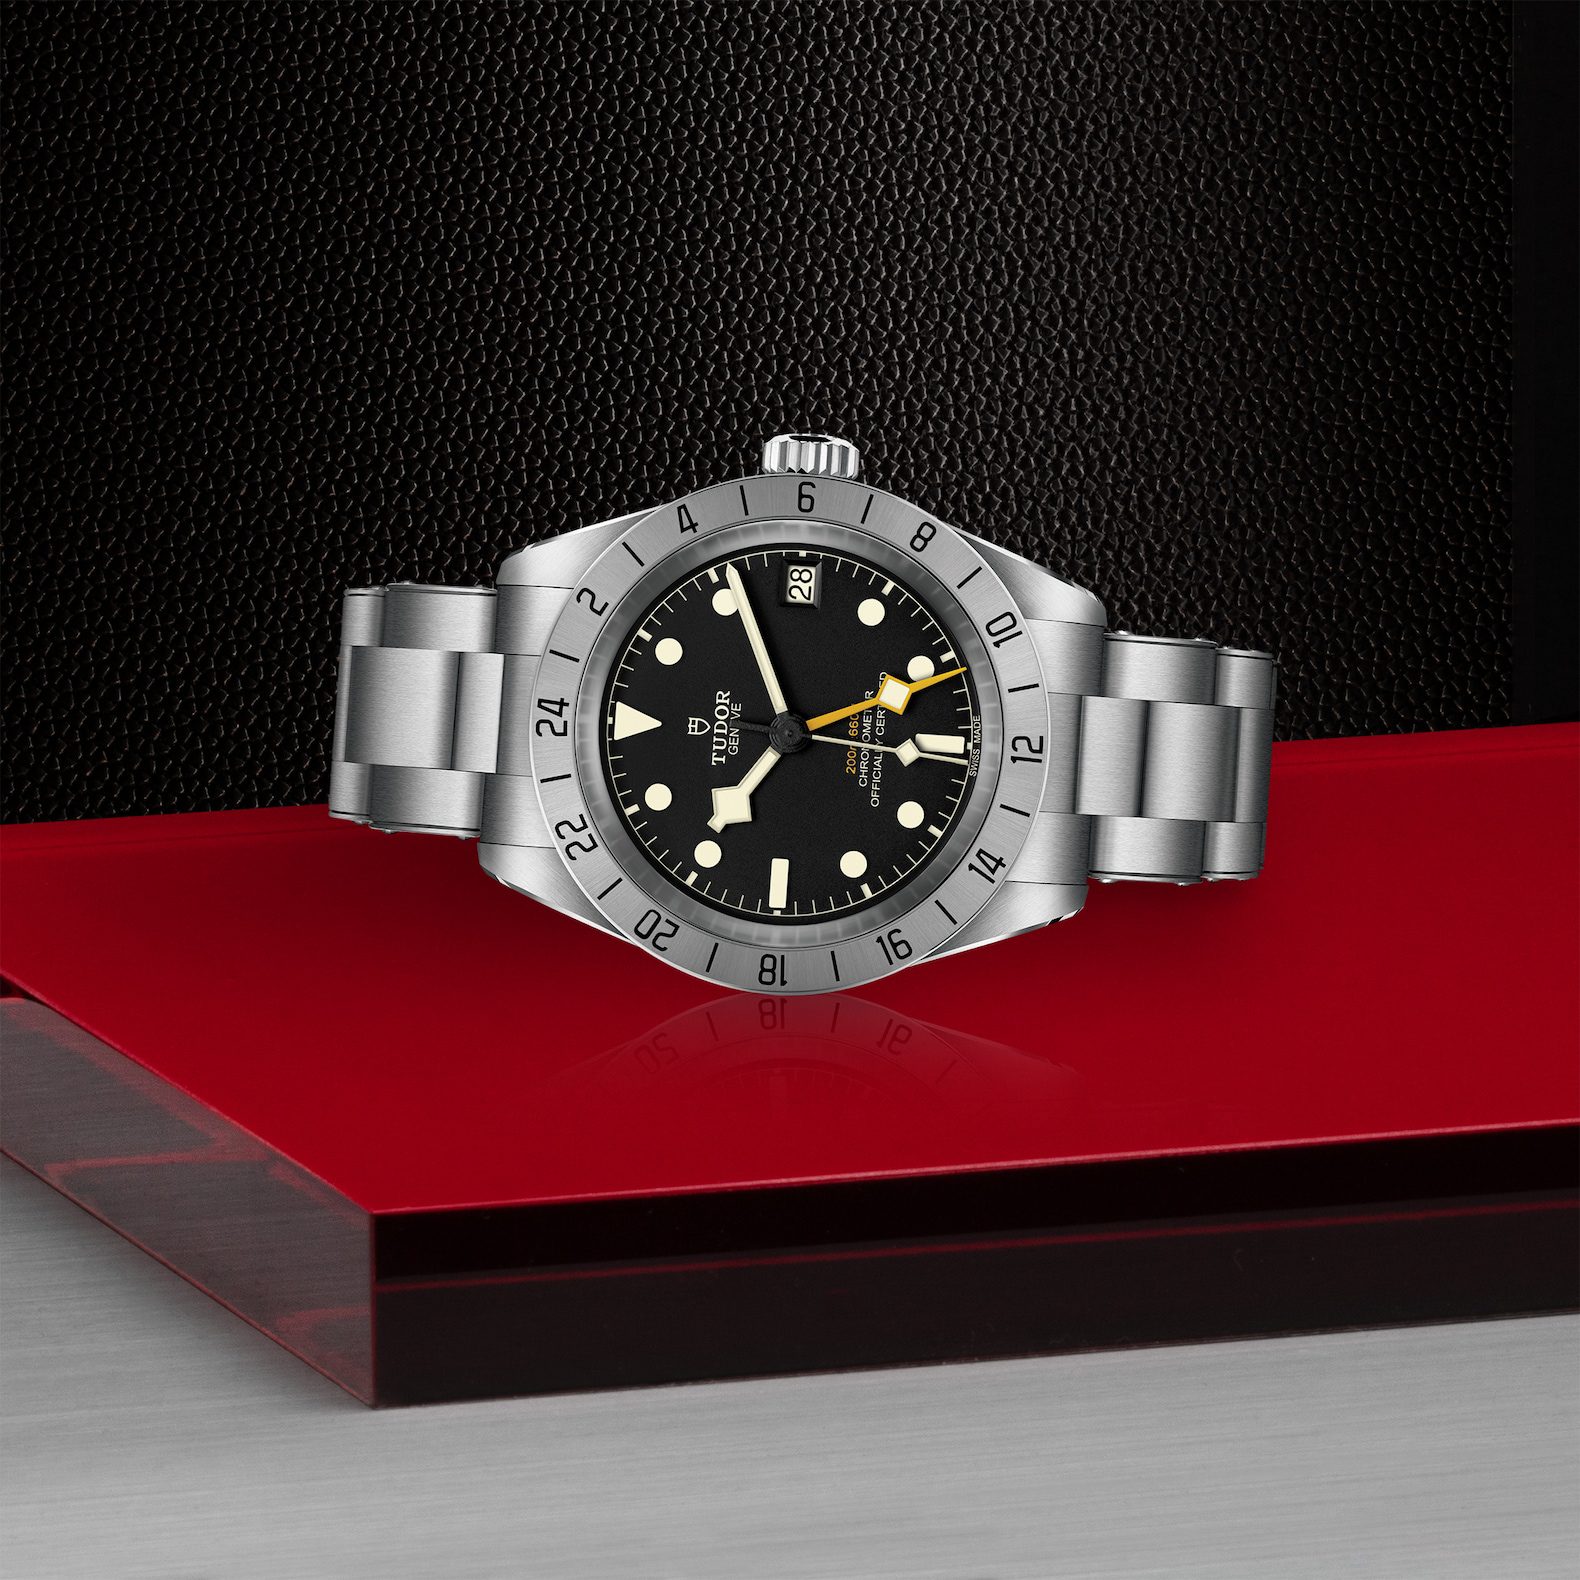 Discovering TUDOR Watches at Meridian Jewelers